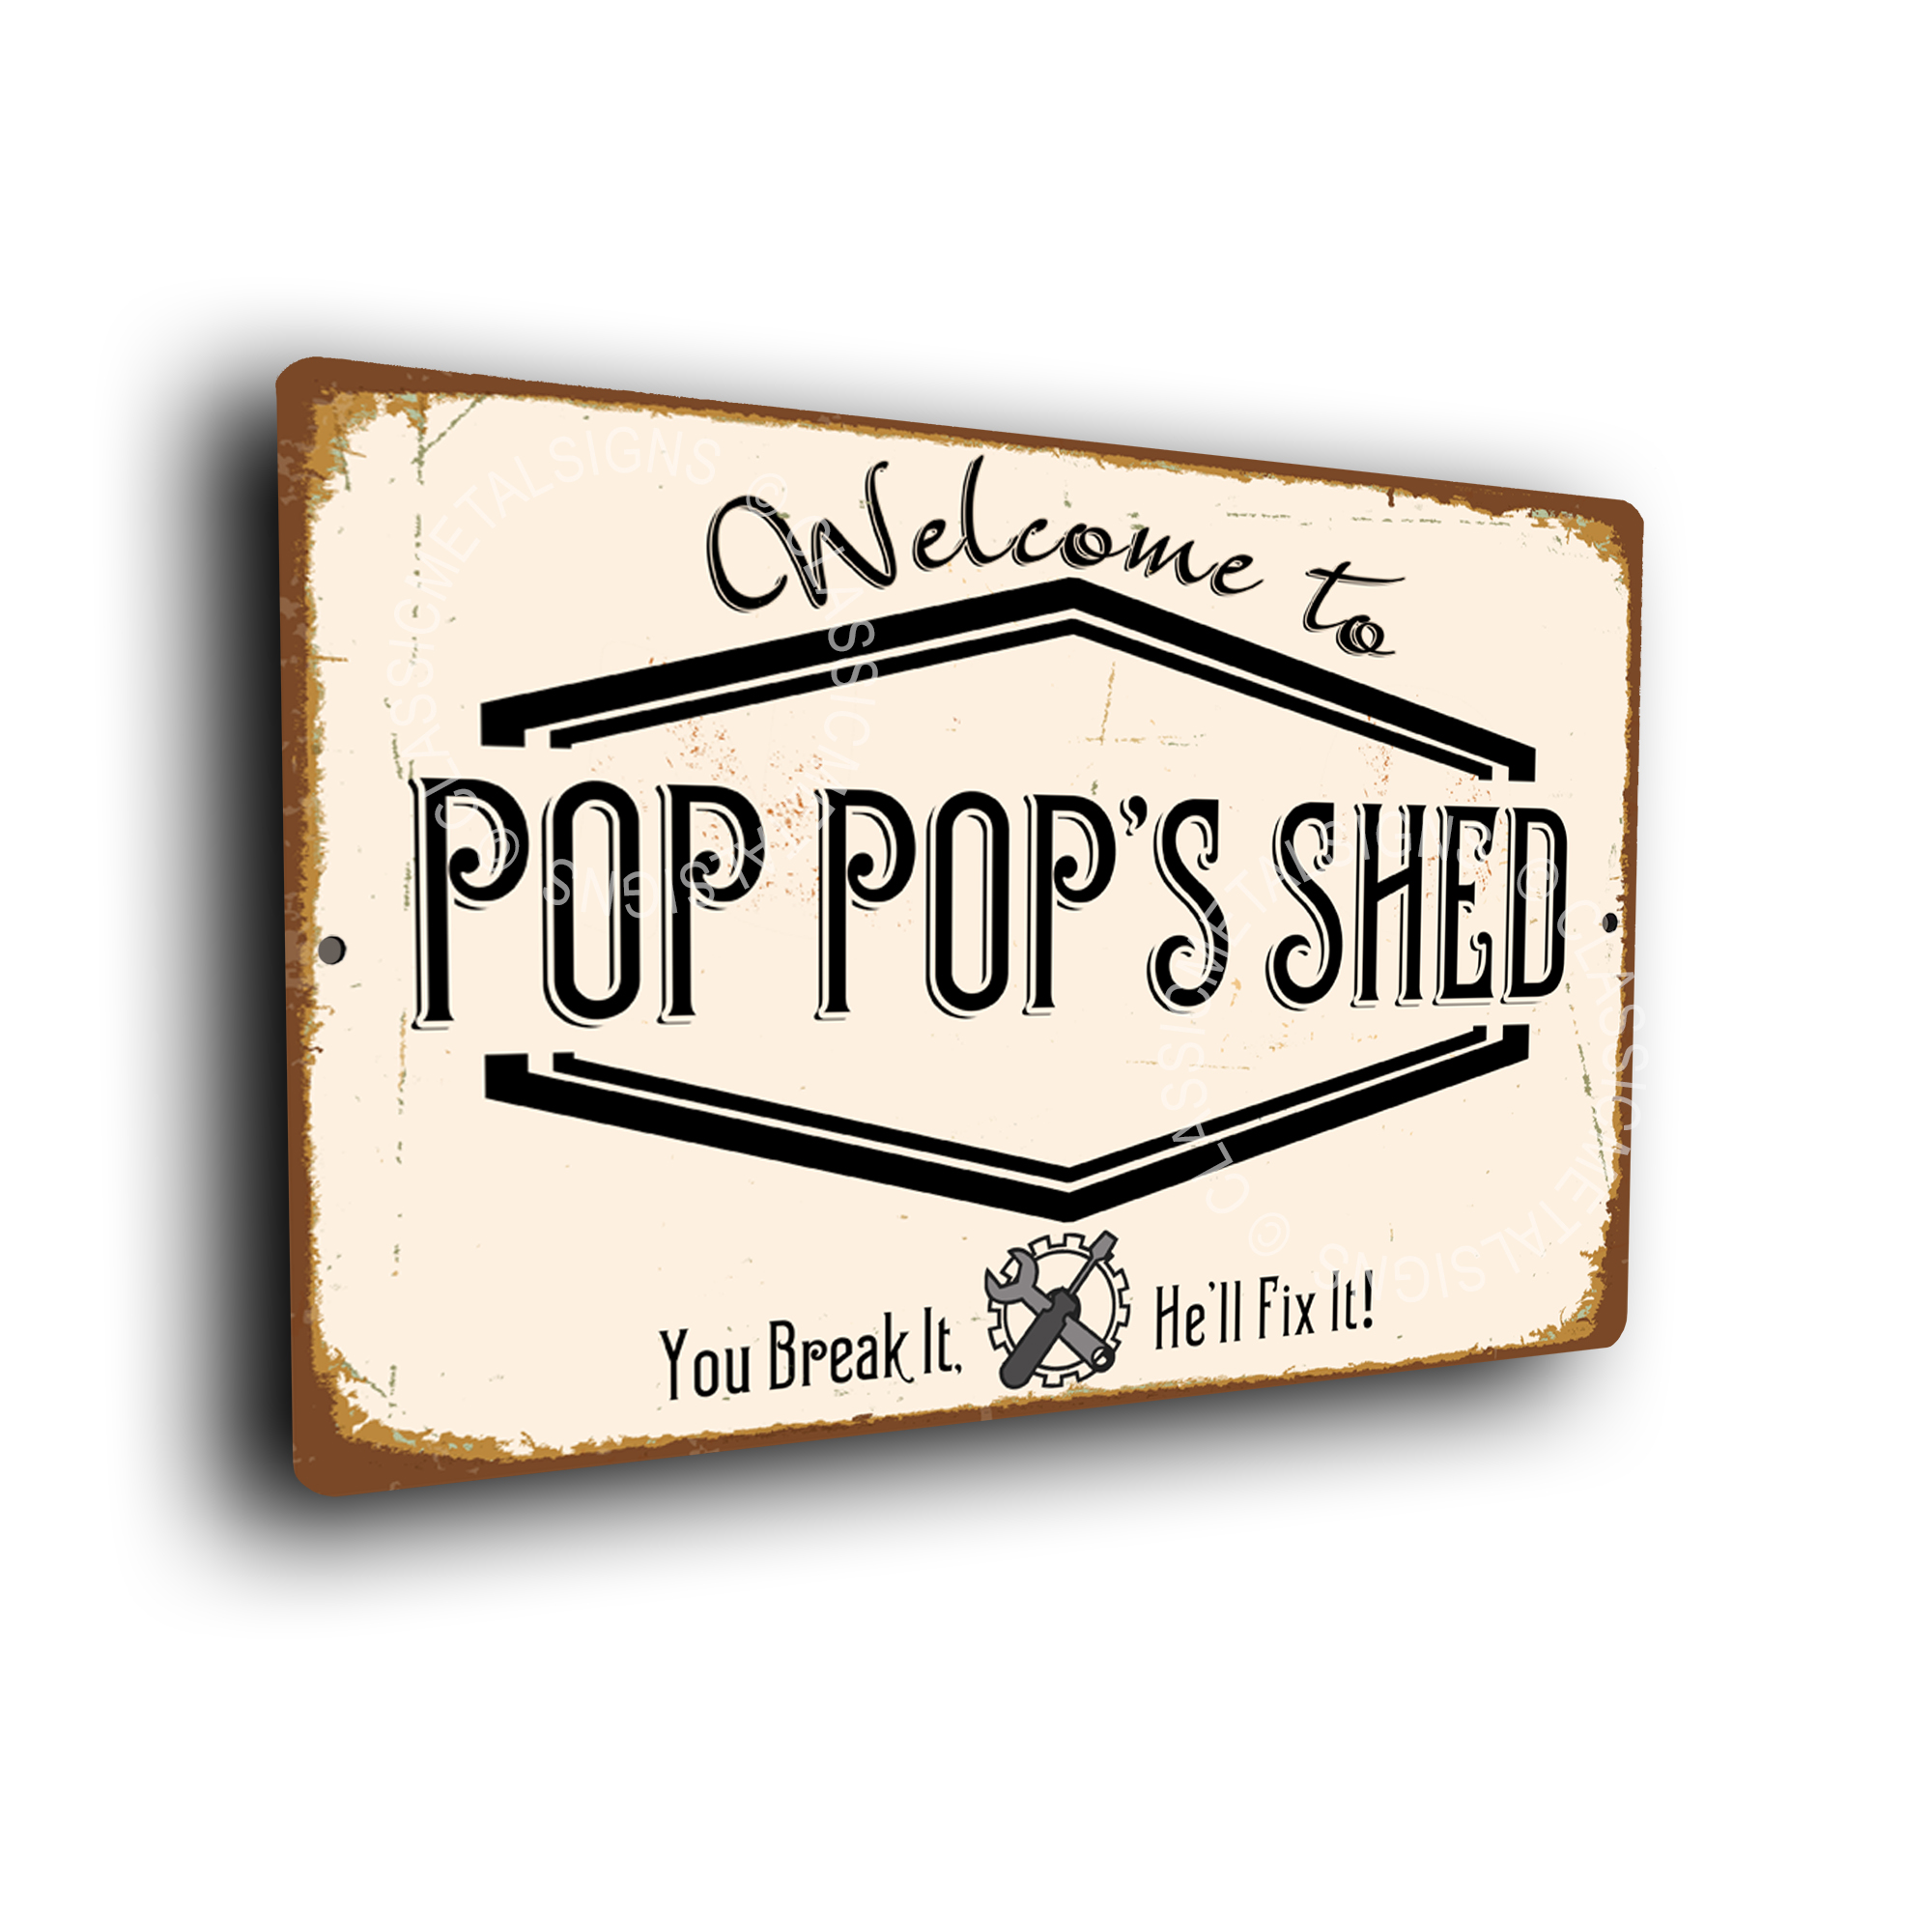 Pop pop's Shed Signs